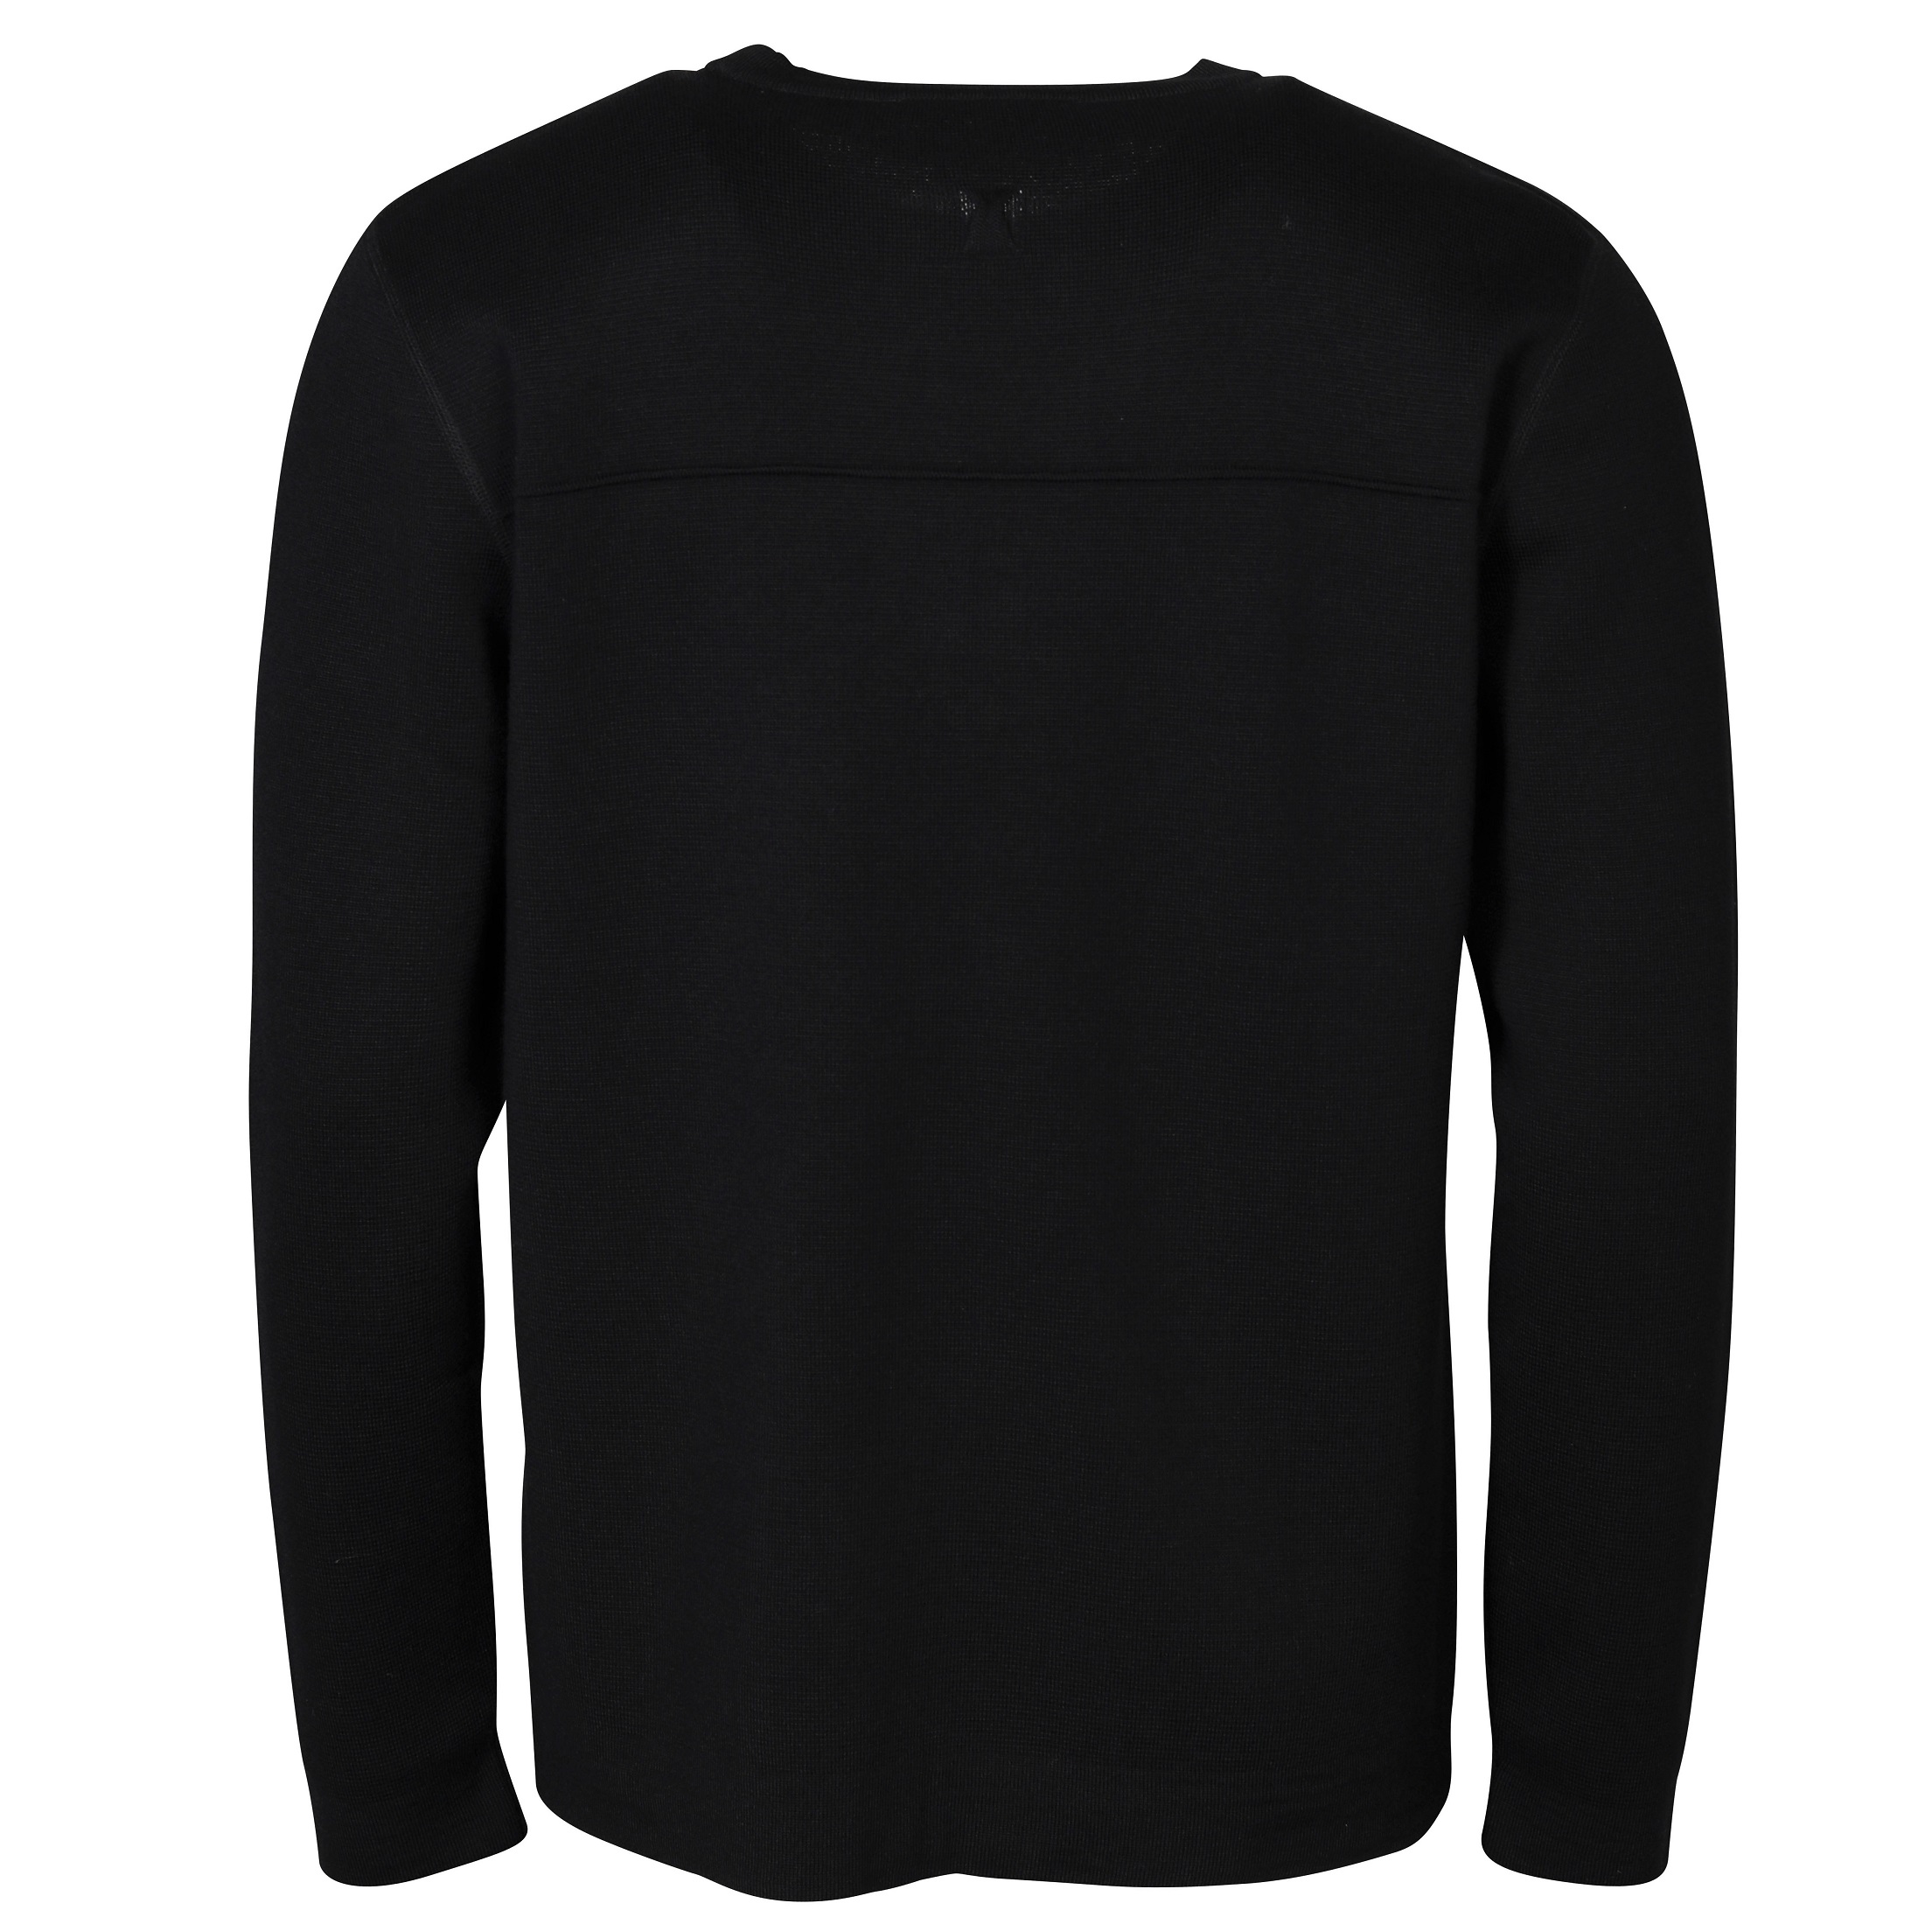 Hannes Roether Knit Pullover in Black